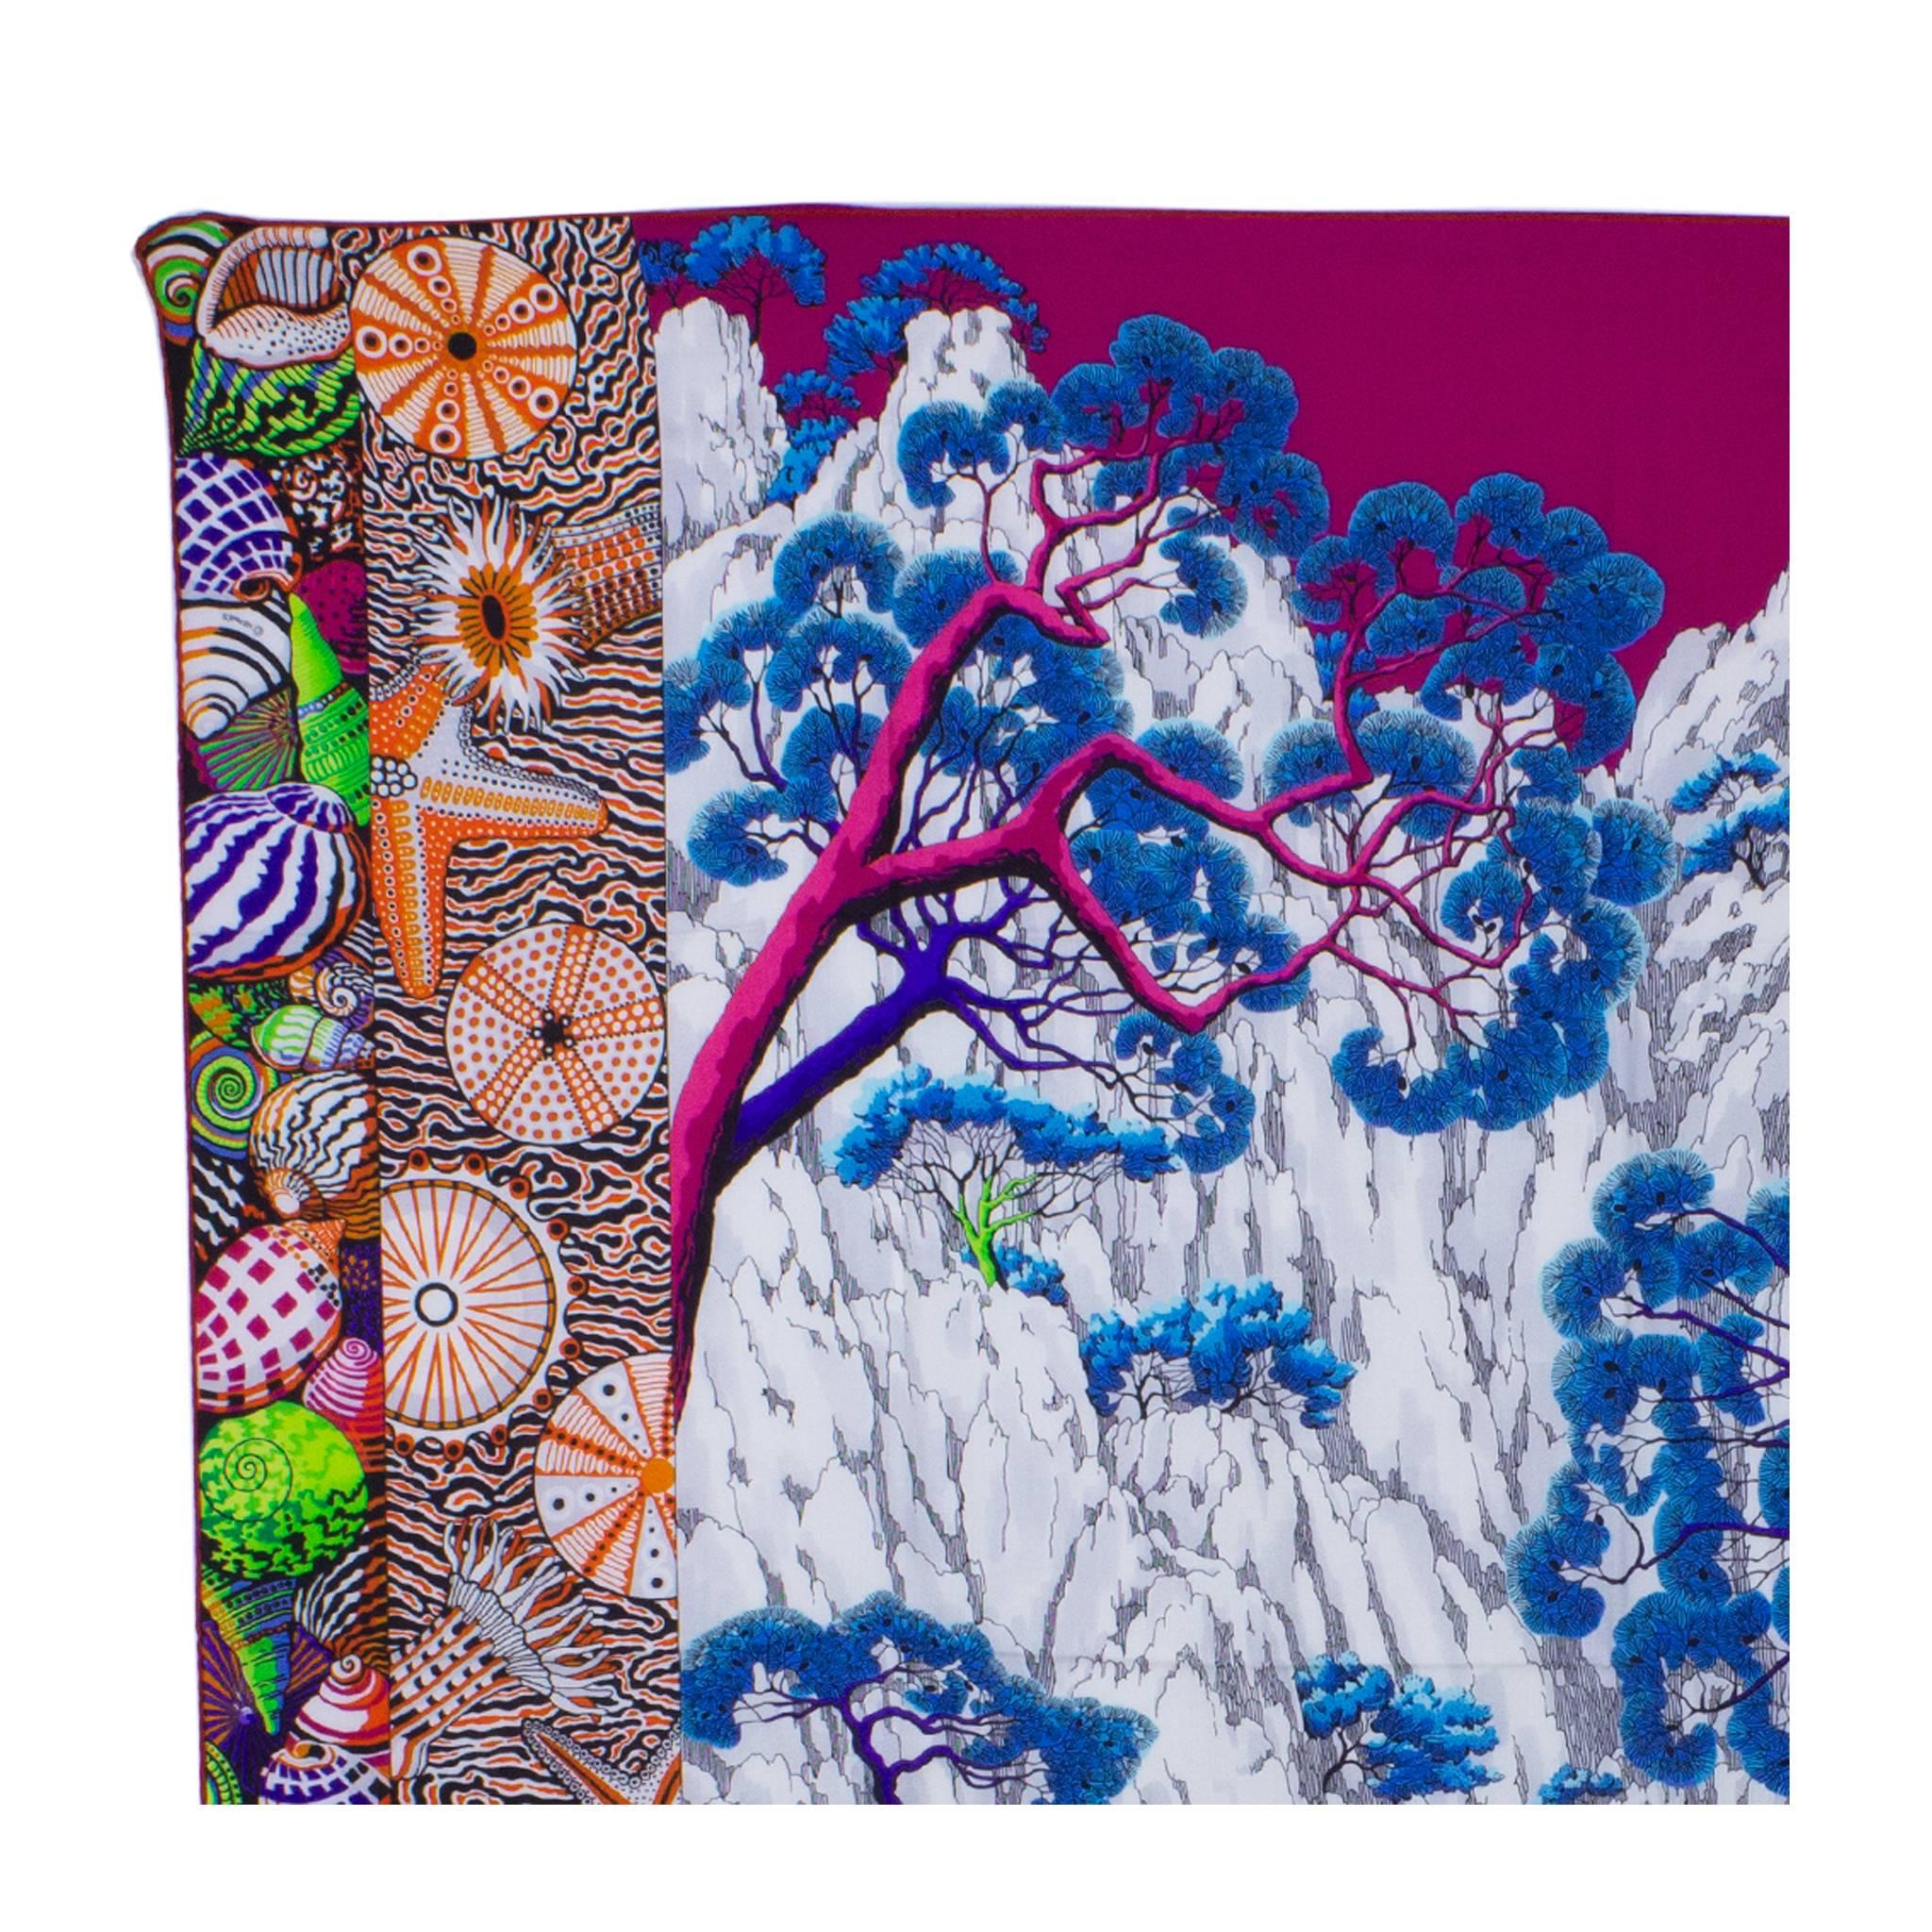 Hermes Shawl "Chale" "Sieste au Paradis" 55" x 55" 70% Cashmere / 30% Silk White / Fuchsia / Blue Color 2017

Pristine condition. Pre-owned and never used

Bought it in Hermes store in 2017

Model: Shawl. Designer: